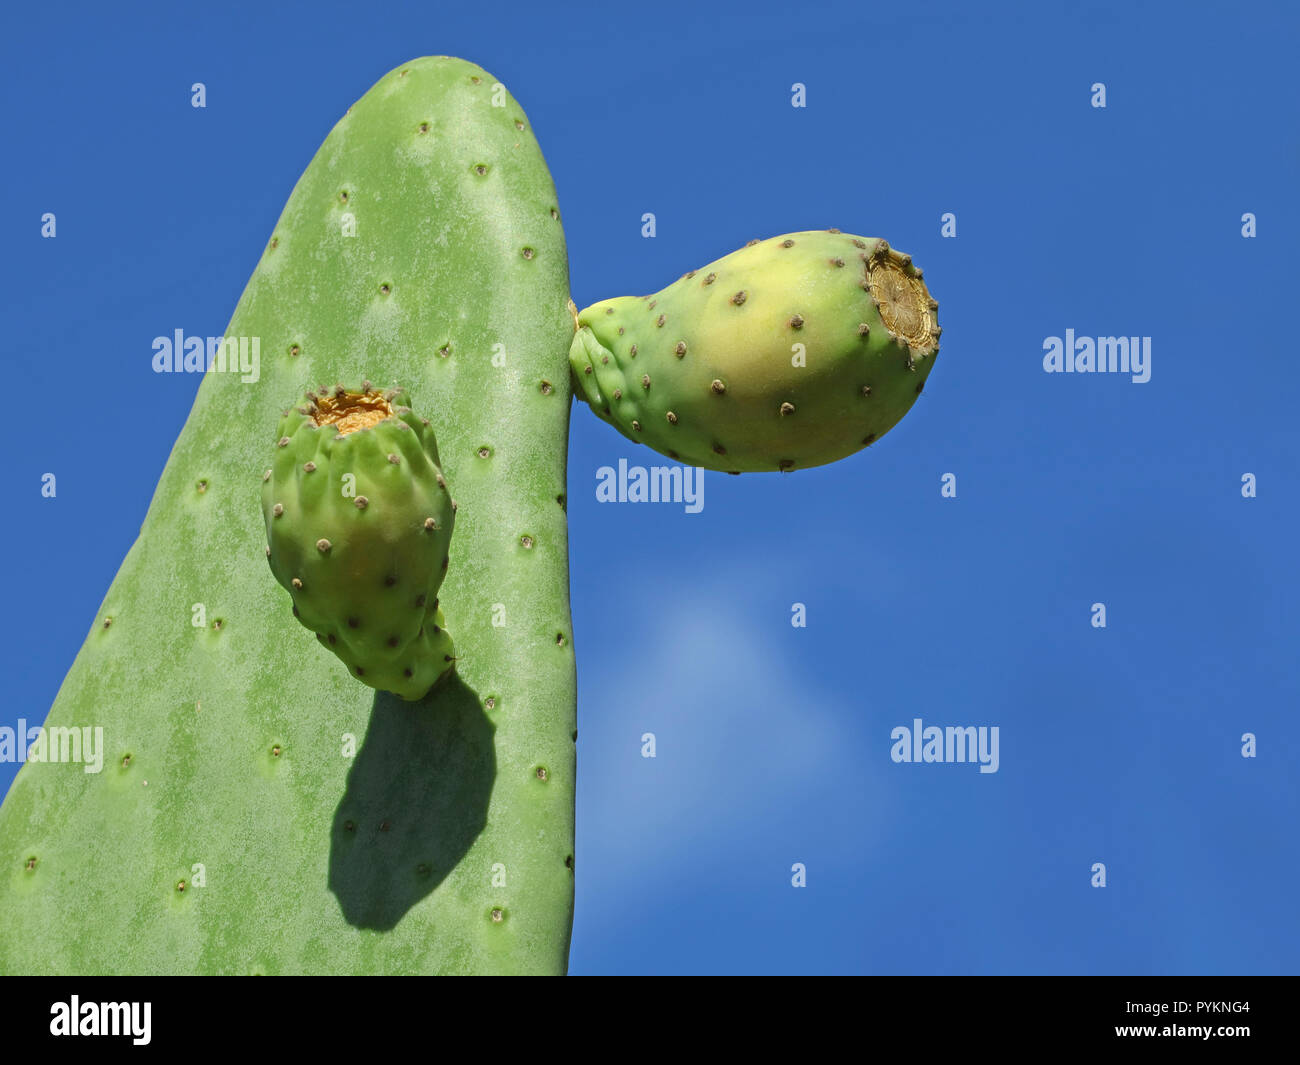 Picky pear cactus with fruits against blue sky background with copy space Stock Photo